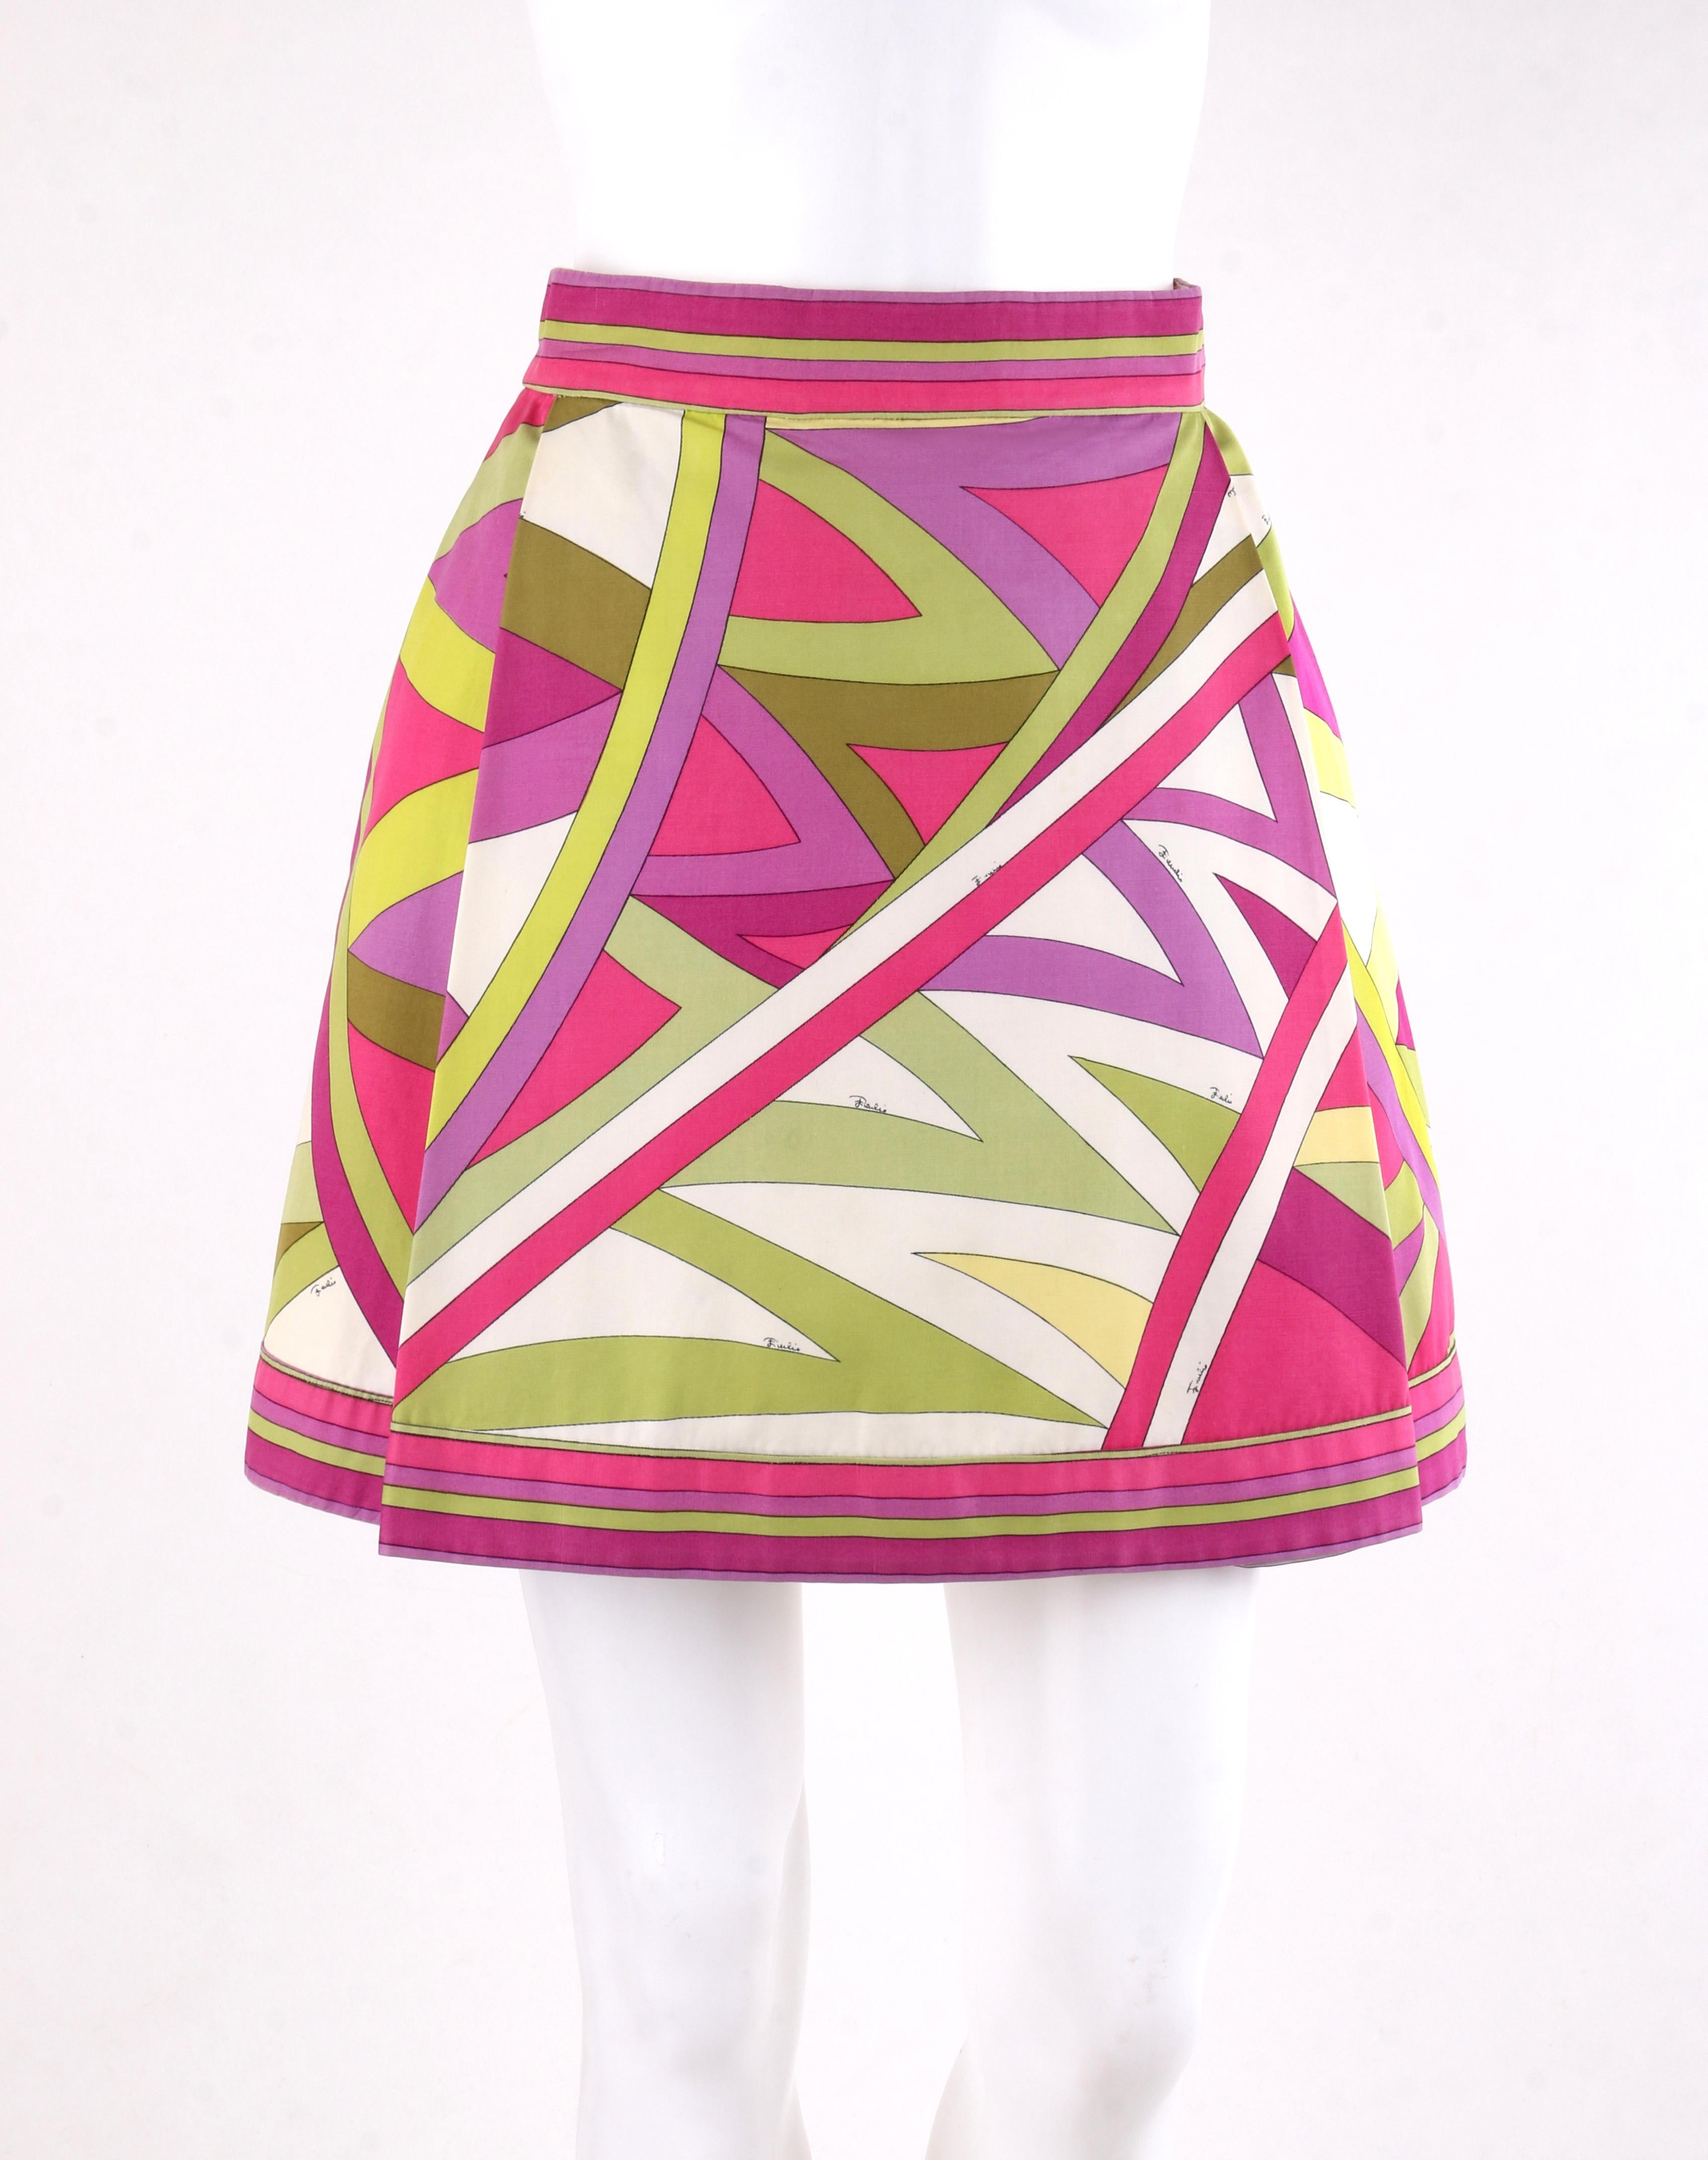 DESCRIPTION: EMILIO PUCCI c.1969 “Arcate” Signature Print Pink Op Art A-Line Mini Skirt
 
Circa: 1969
Label(s): Emilio Pucci / Exclusively for Saks Fifth Avenue   
Style: Mini skirt
Color(s): Shades of pink, purple, green, white and black. 
Lined: